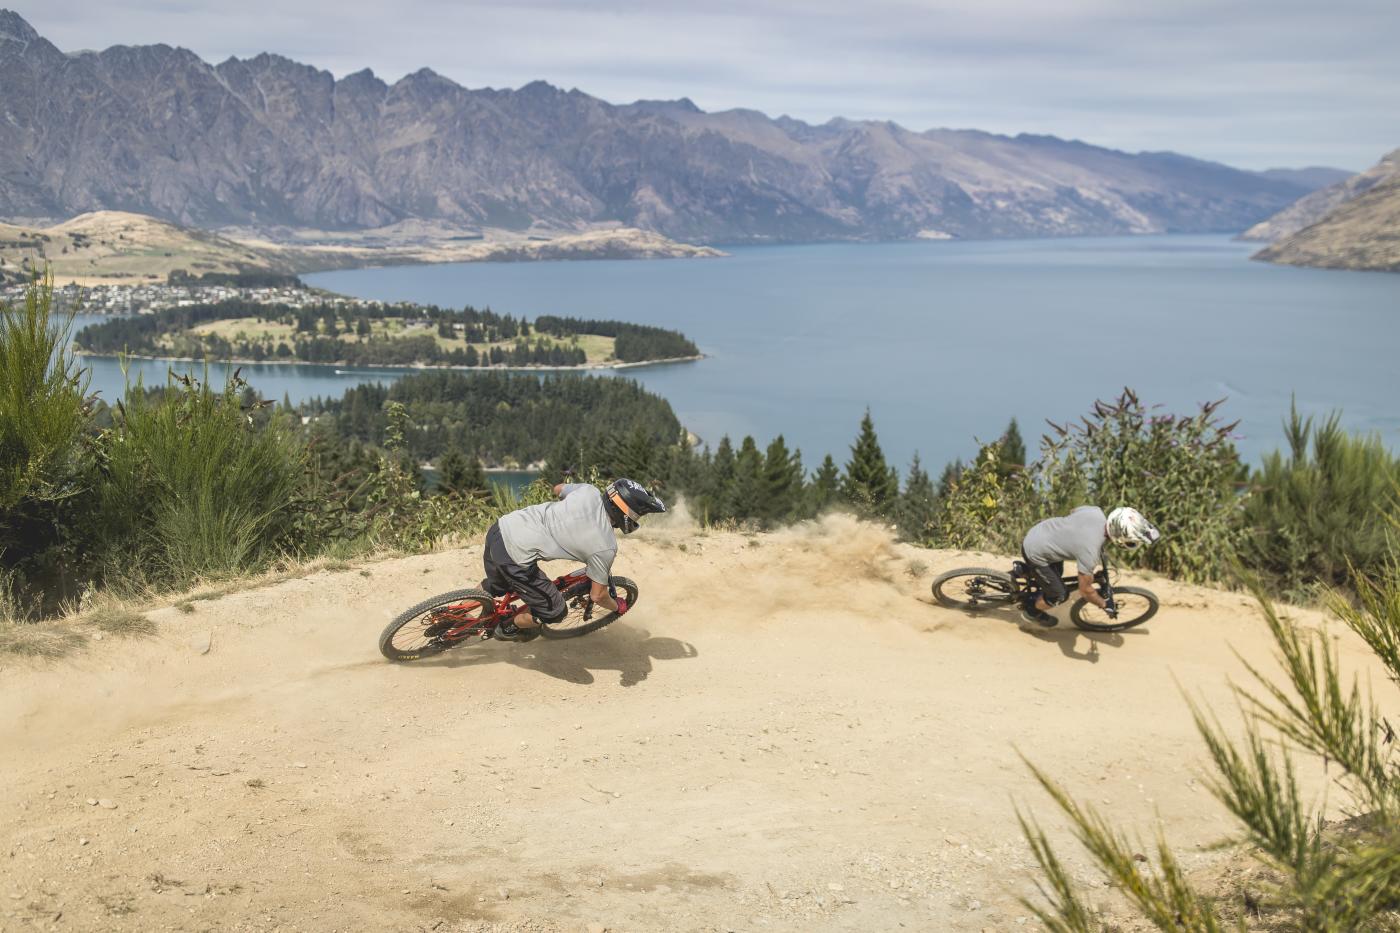 Bikers riding Queenstown Bike Park in Queenstown with Remarkables Mountains in the background